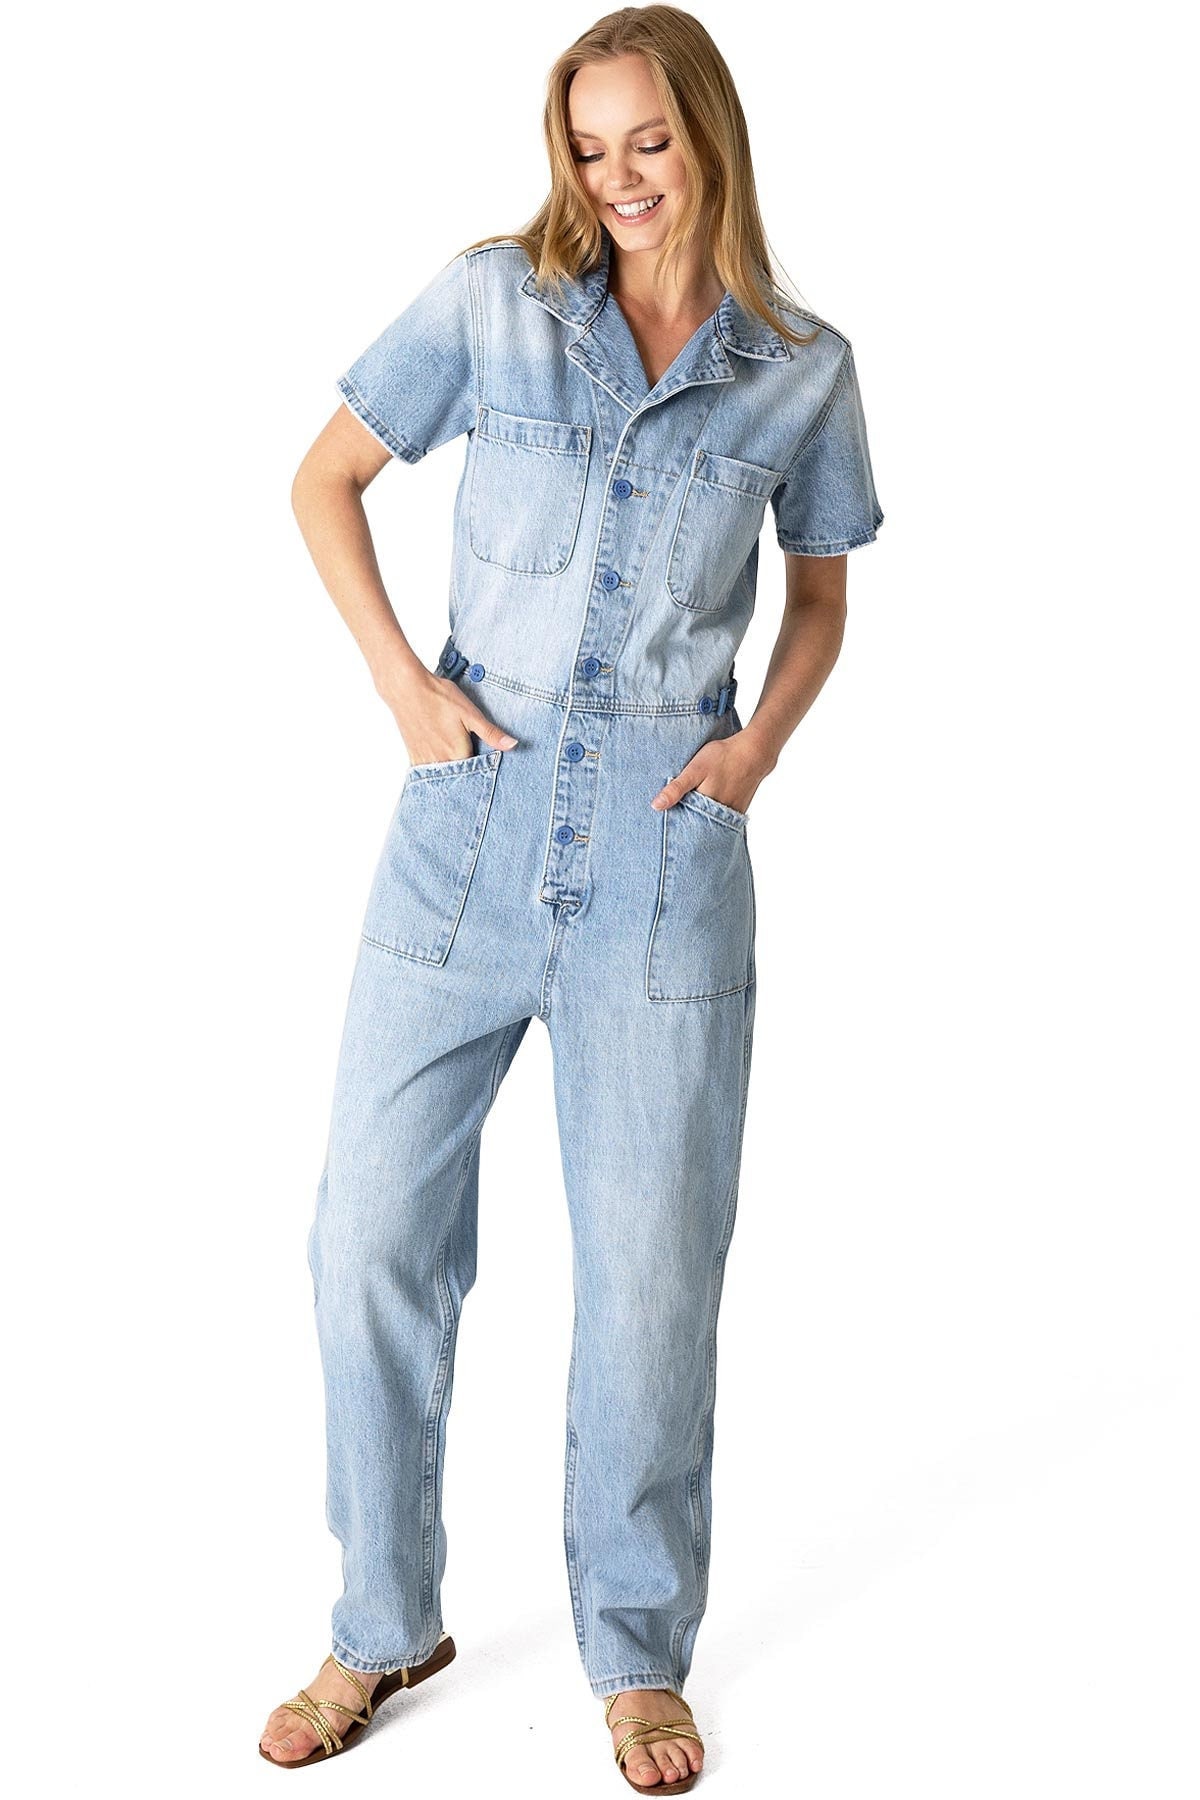 Buy Jeans Jumpsuit Online In India  Etsy India